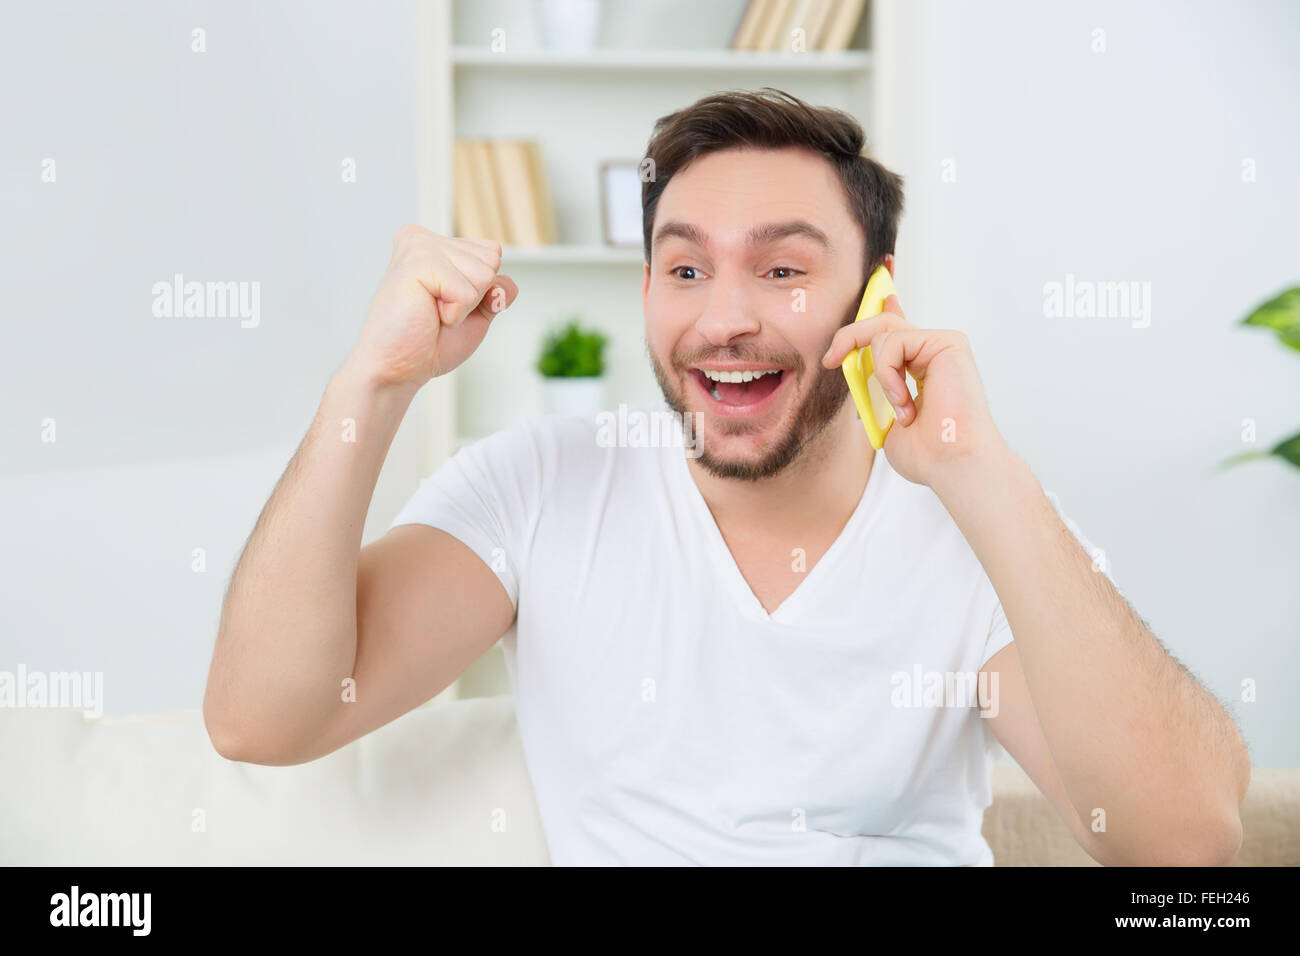 Cheerful man is ready to celebrate the good news. Stock Photo